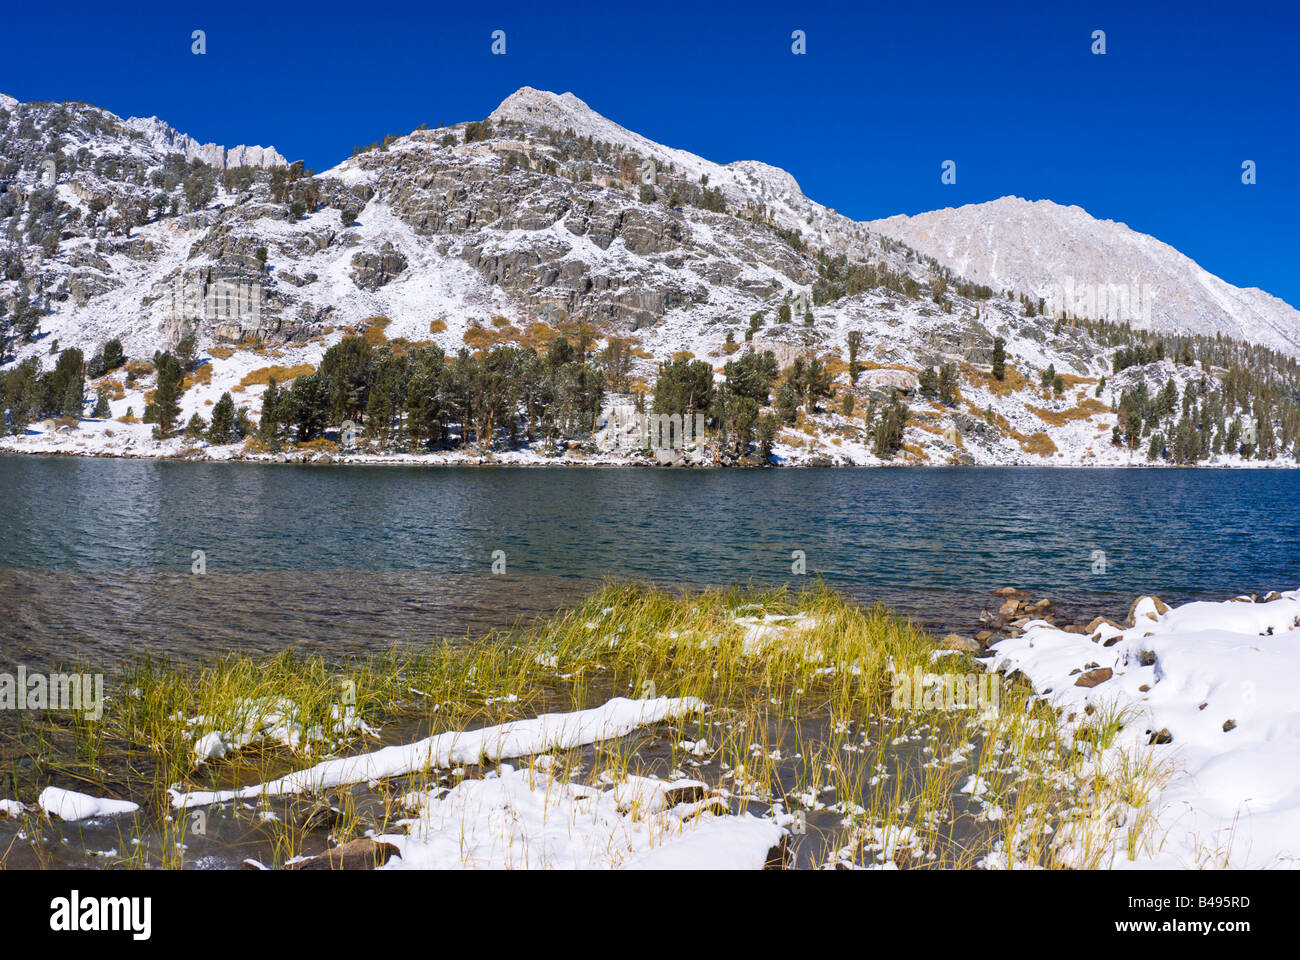 Mount Starr from Long Lake after an early storm John Muir Wilderness Sierra Nevada Mountains California Stock Photo